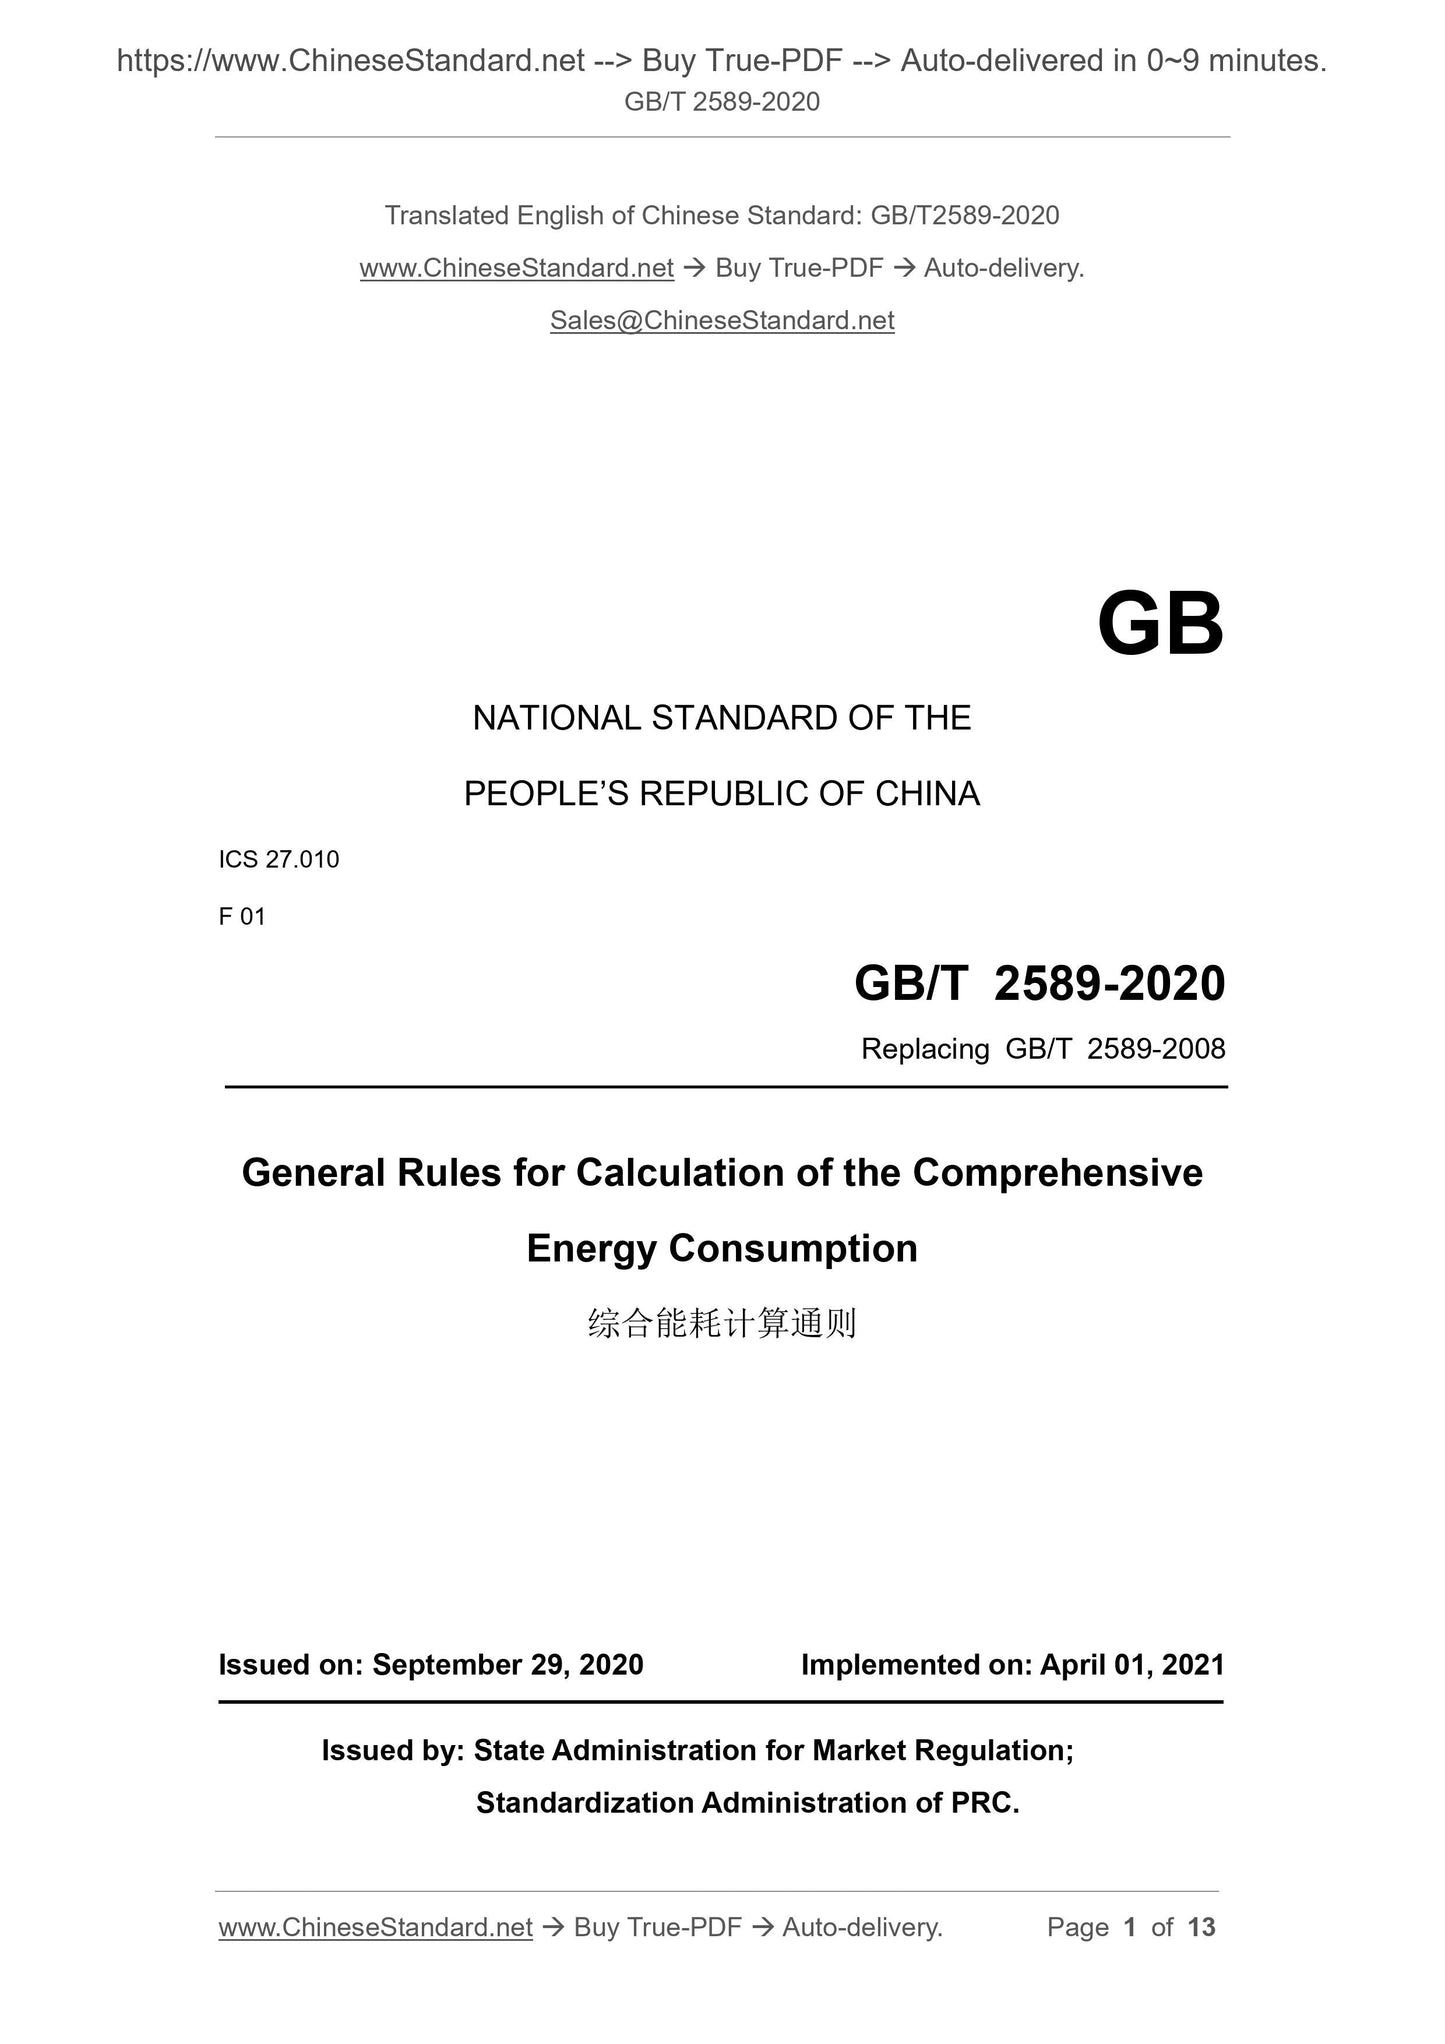 GB/T 2589-2020 Page 1